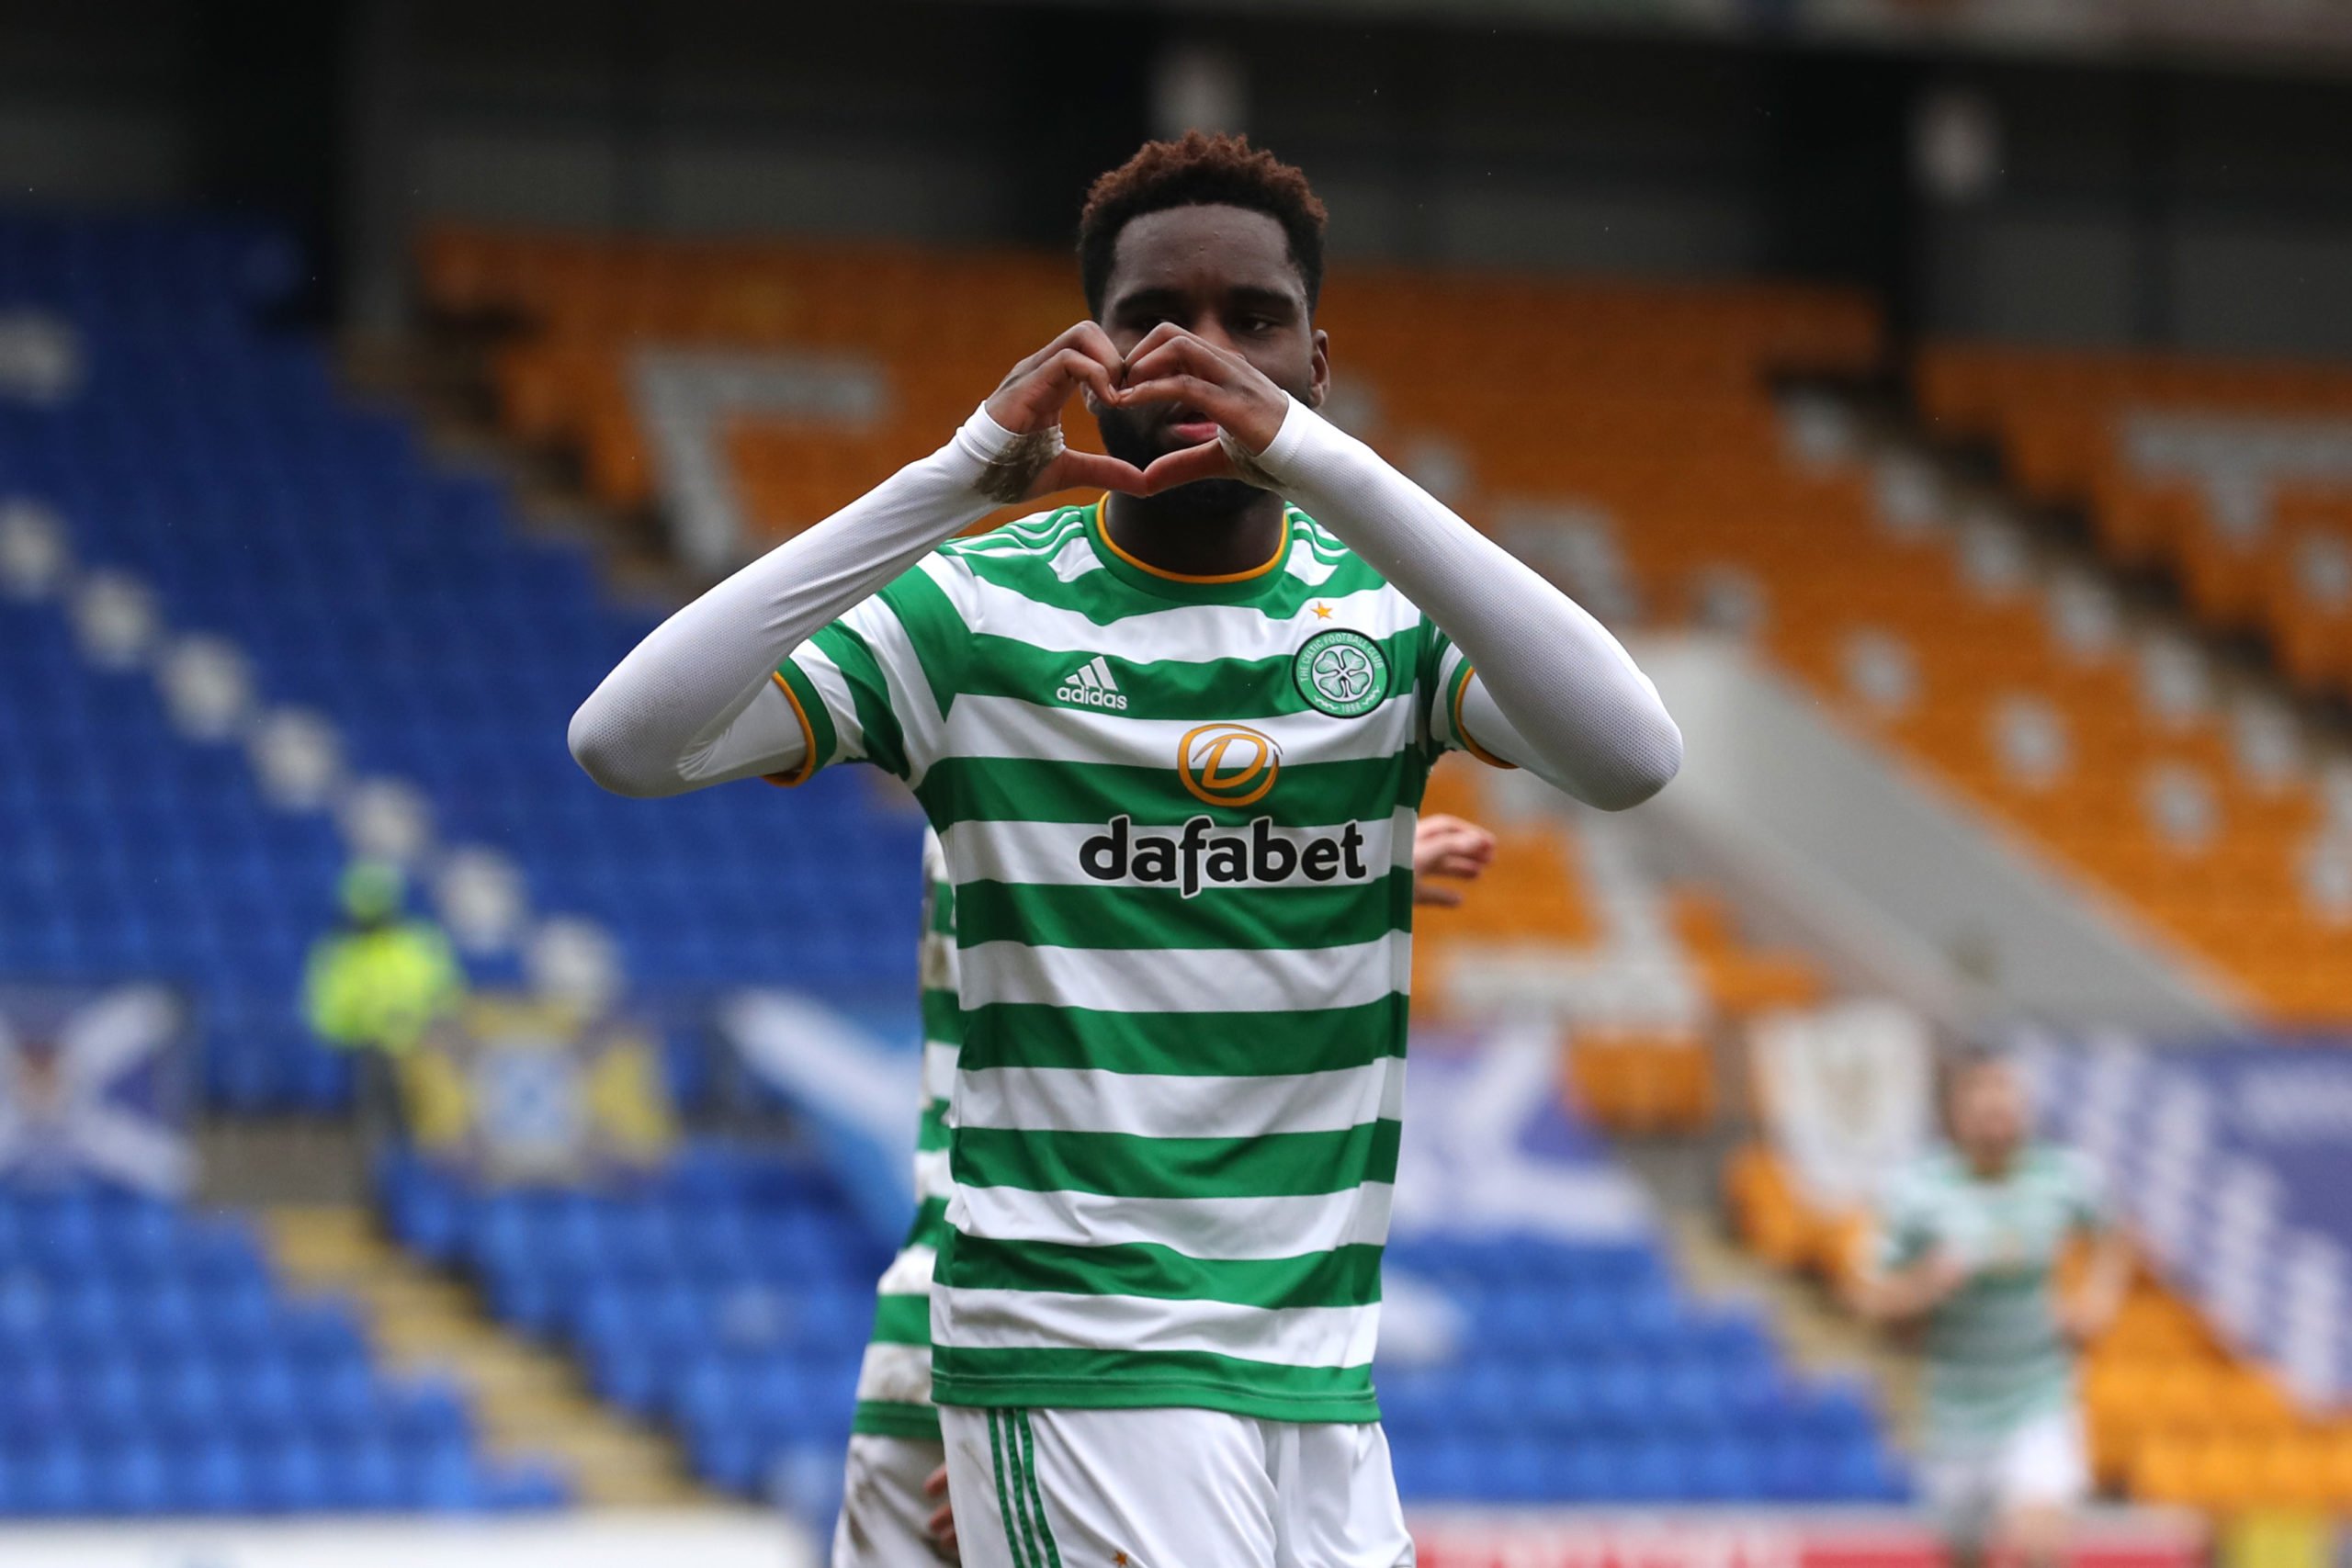 Wholesome: Celtic stars Edouard and Soro have spirited debate at FT